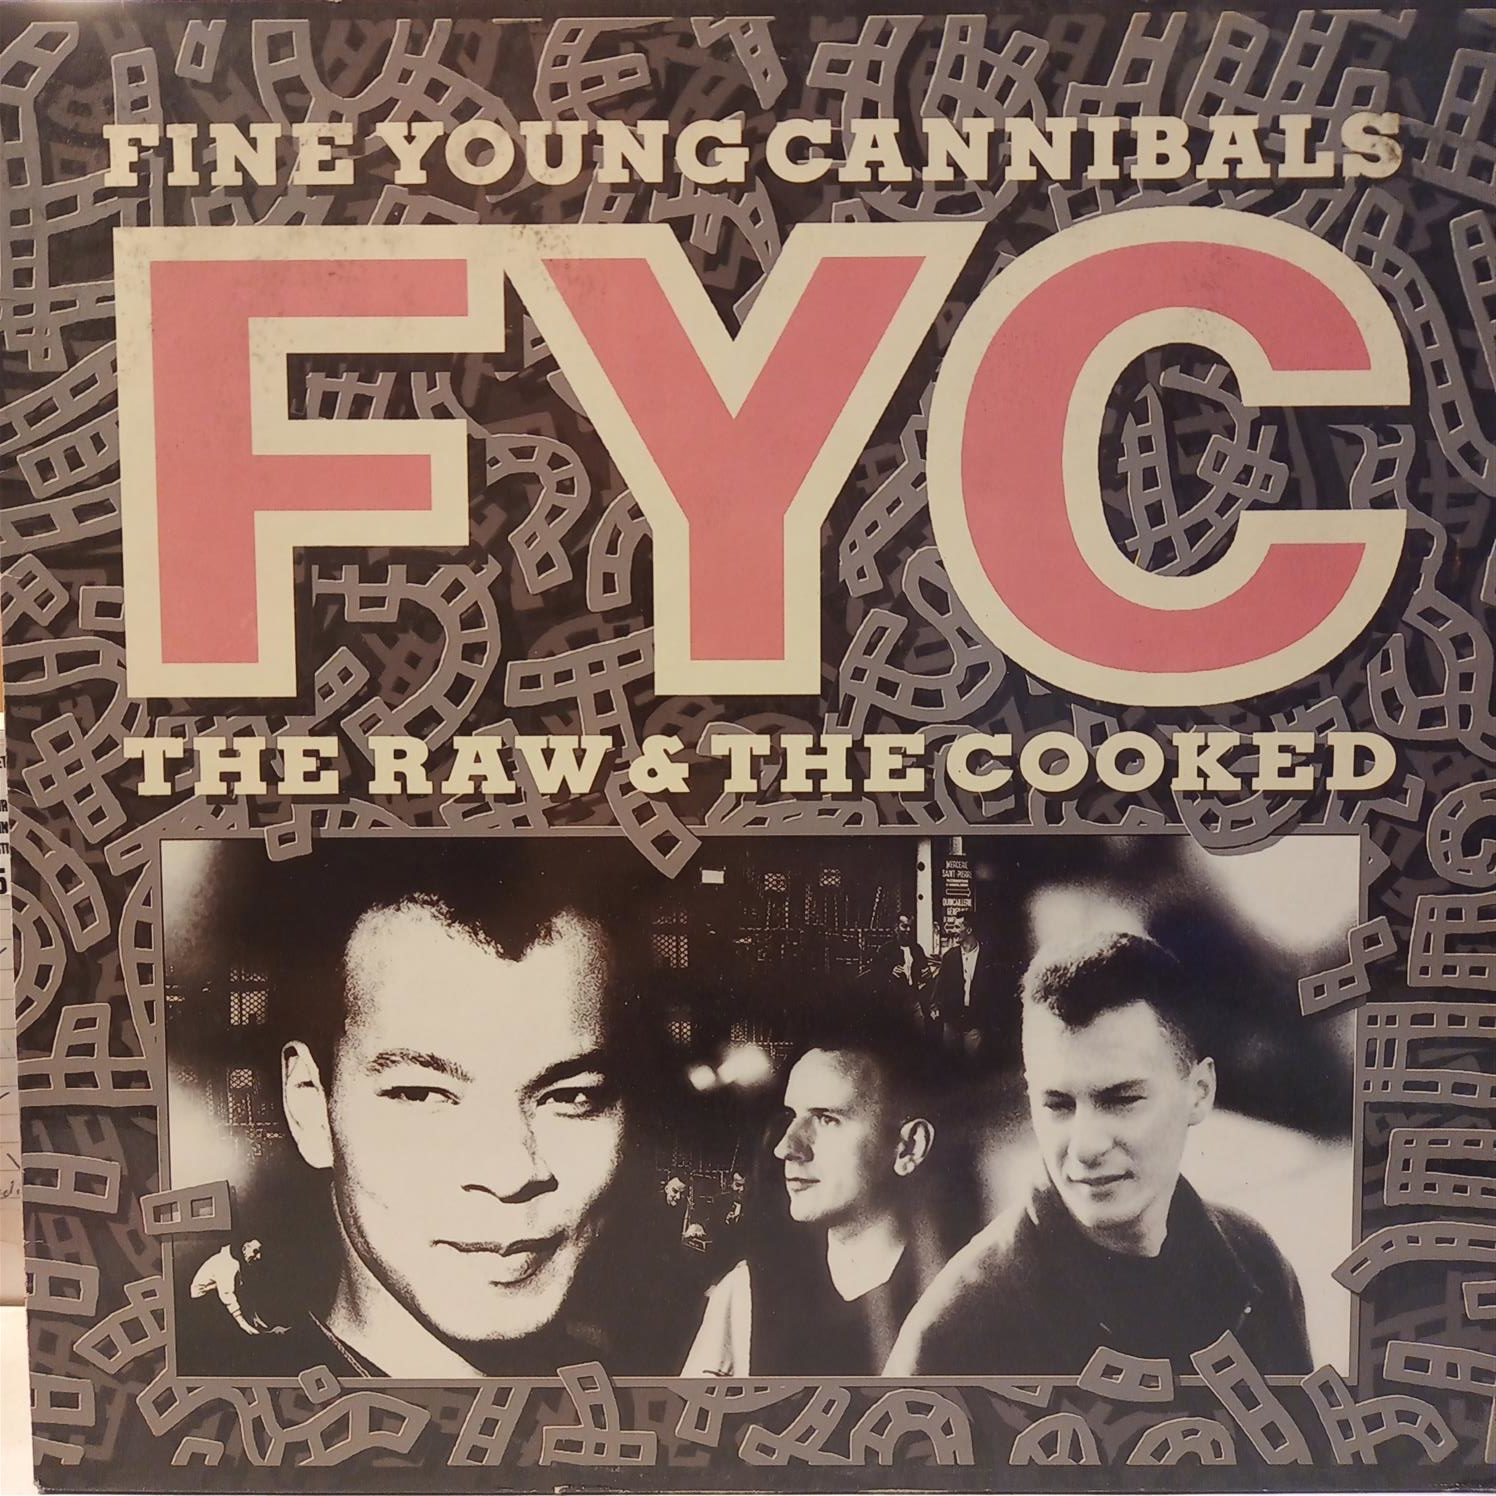 FINE YOUNG CANNIBALS – THE RAW & THE COOKED ON